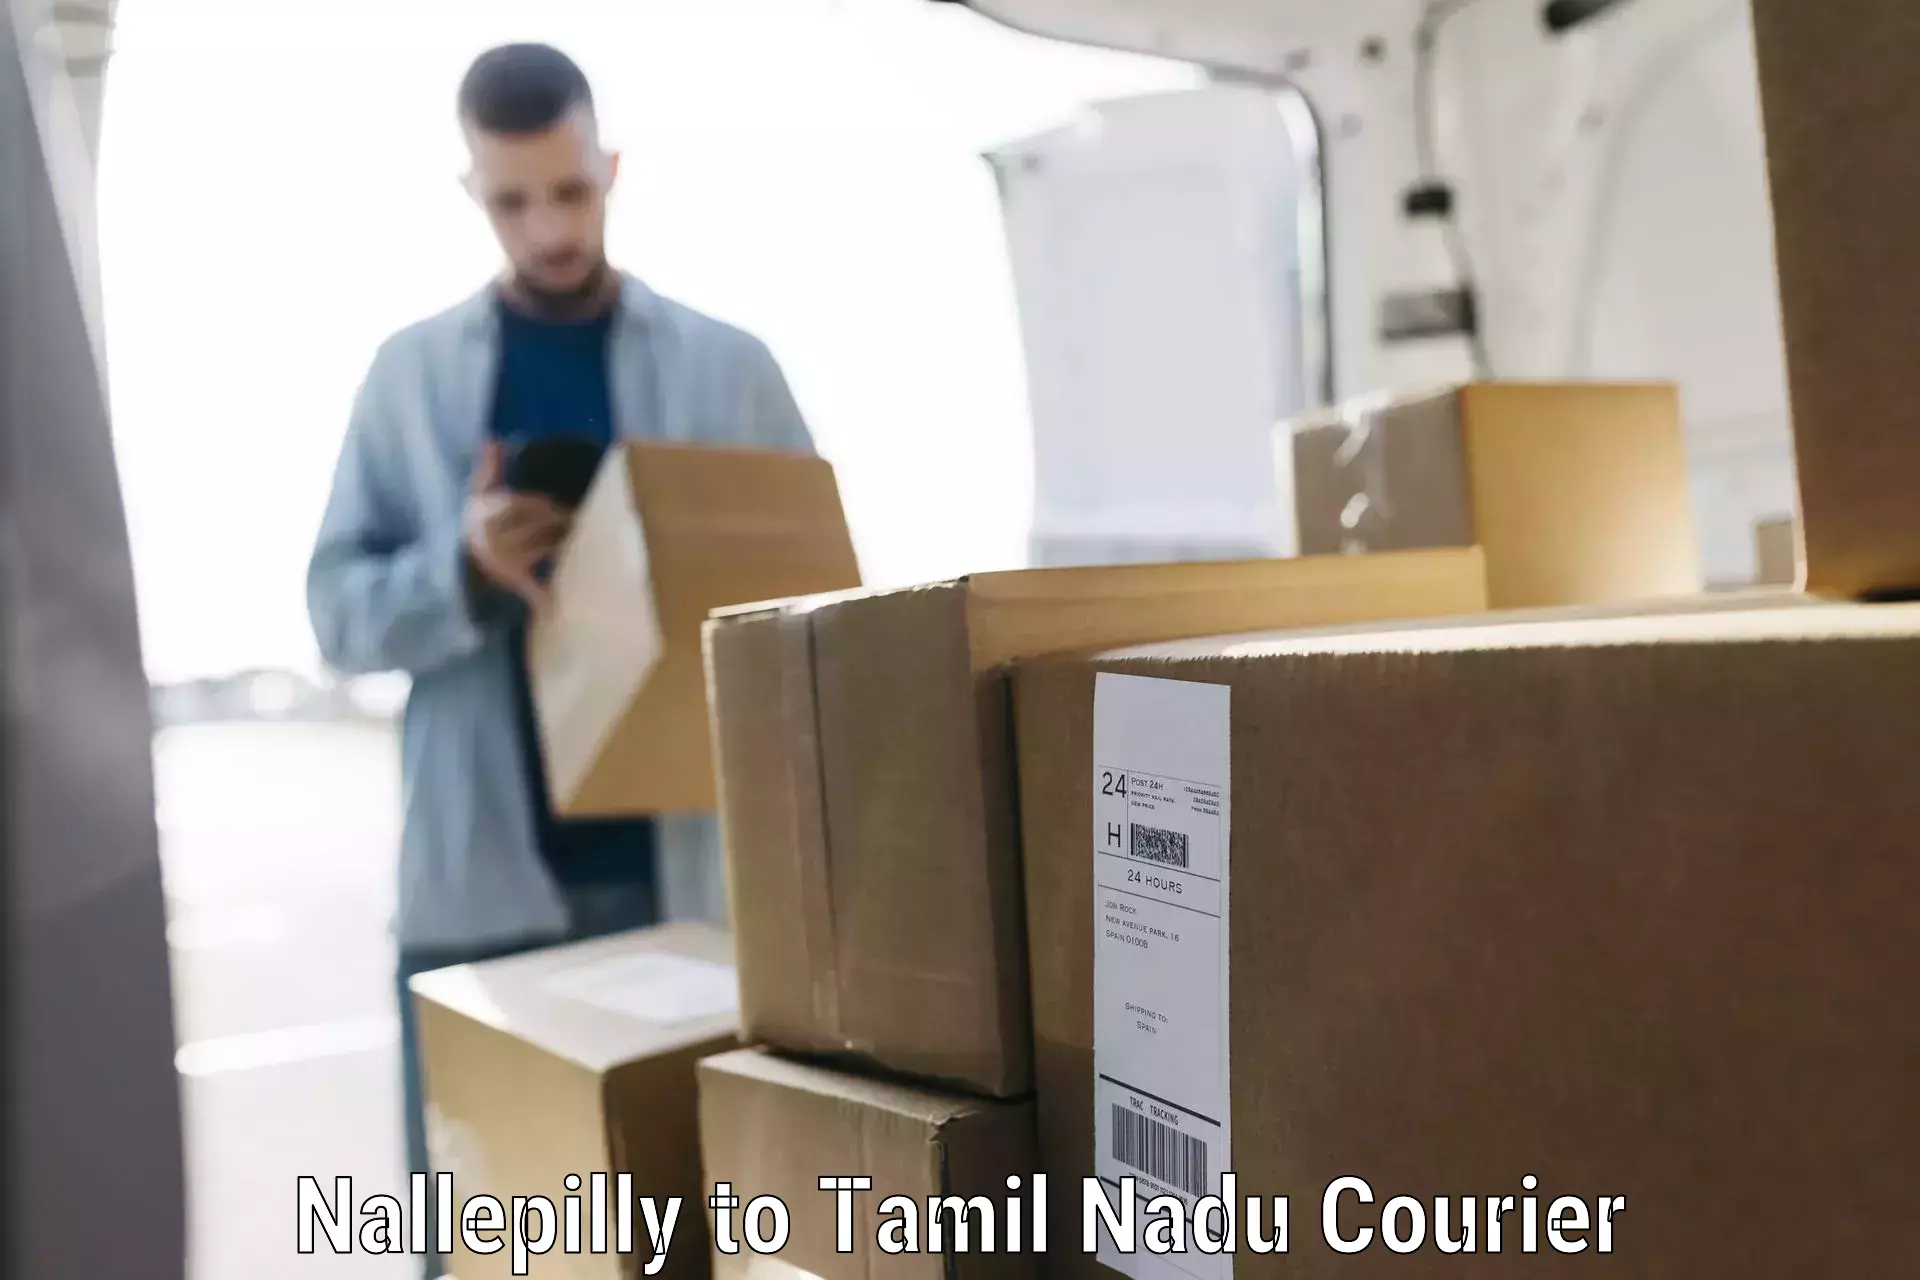 Luggage shipment processing Nallepilly to Thuraiyur